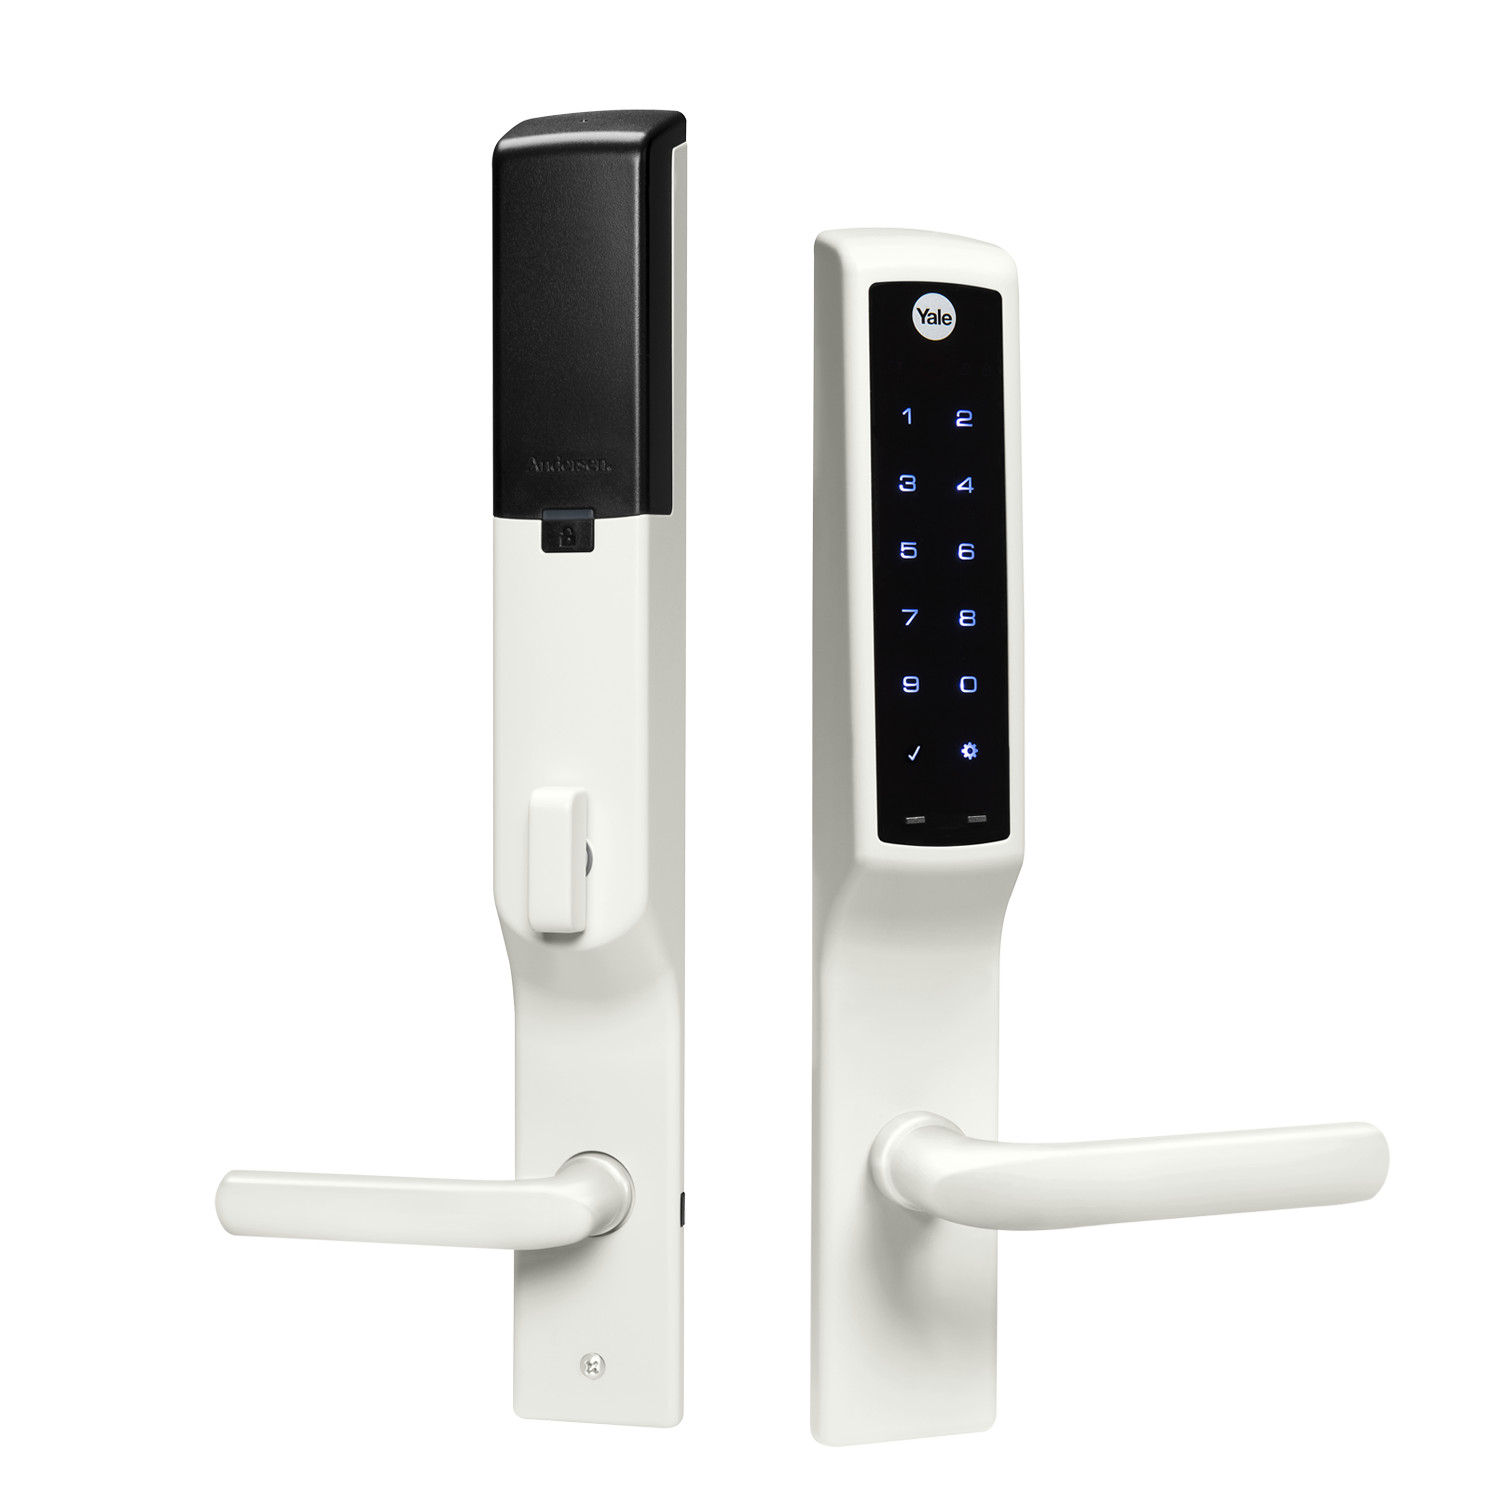 Yale Assure Lock for Andersen Patio Doors with Z-Wave Plus - White